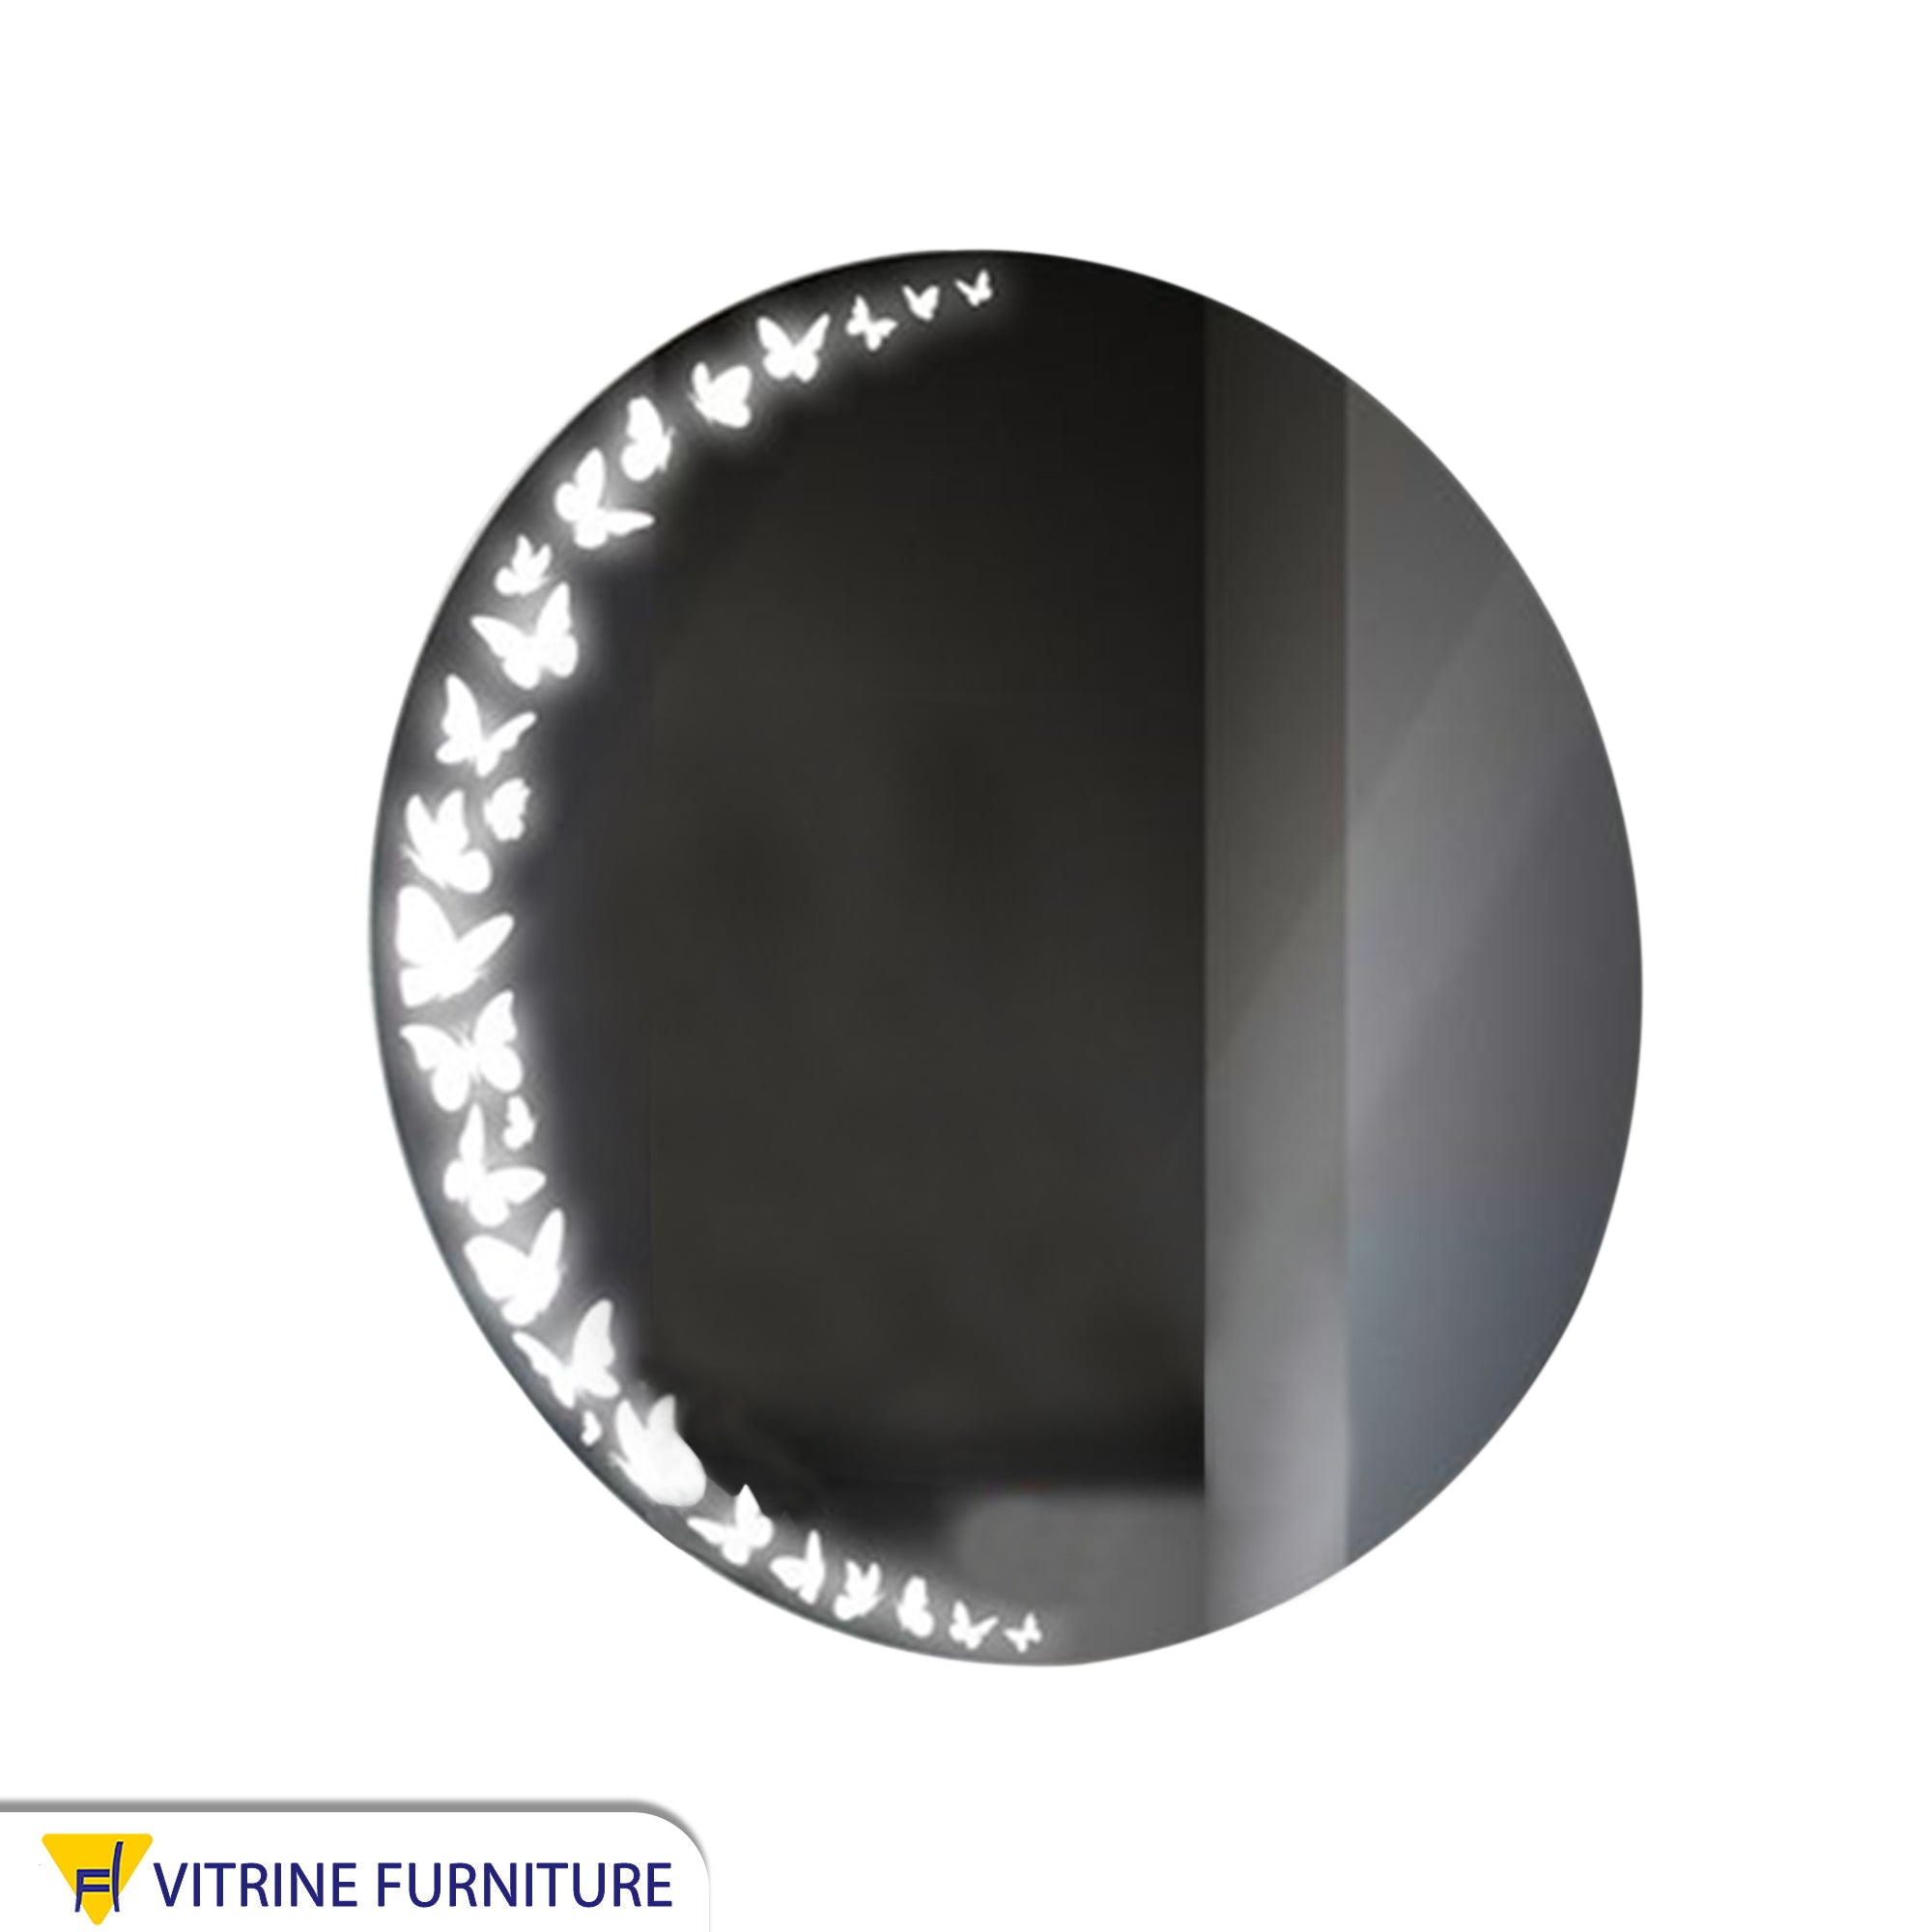 Circular LED mirror with butterfly designs